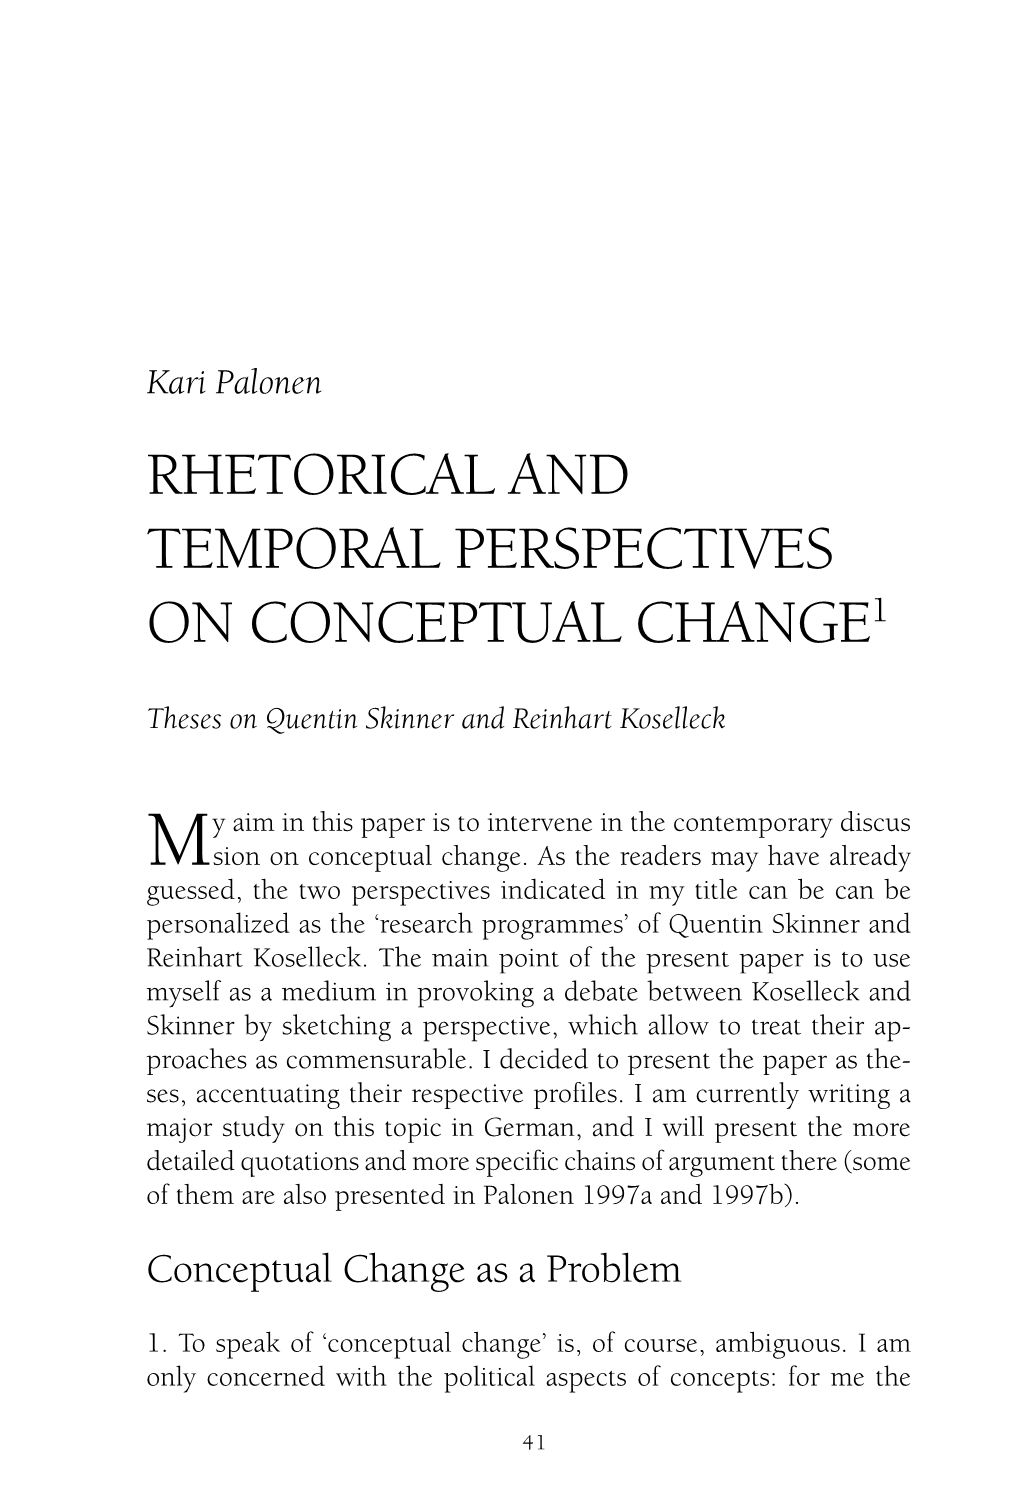 Rhetorical and Temporal Perspectives on Conceptual Change1